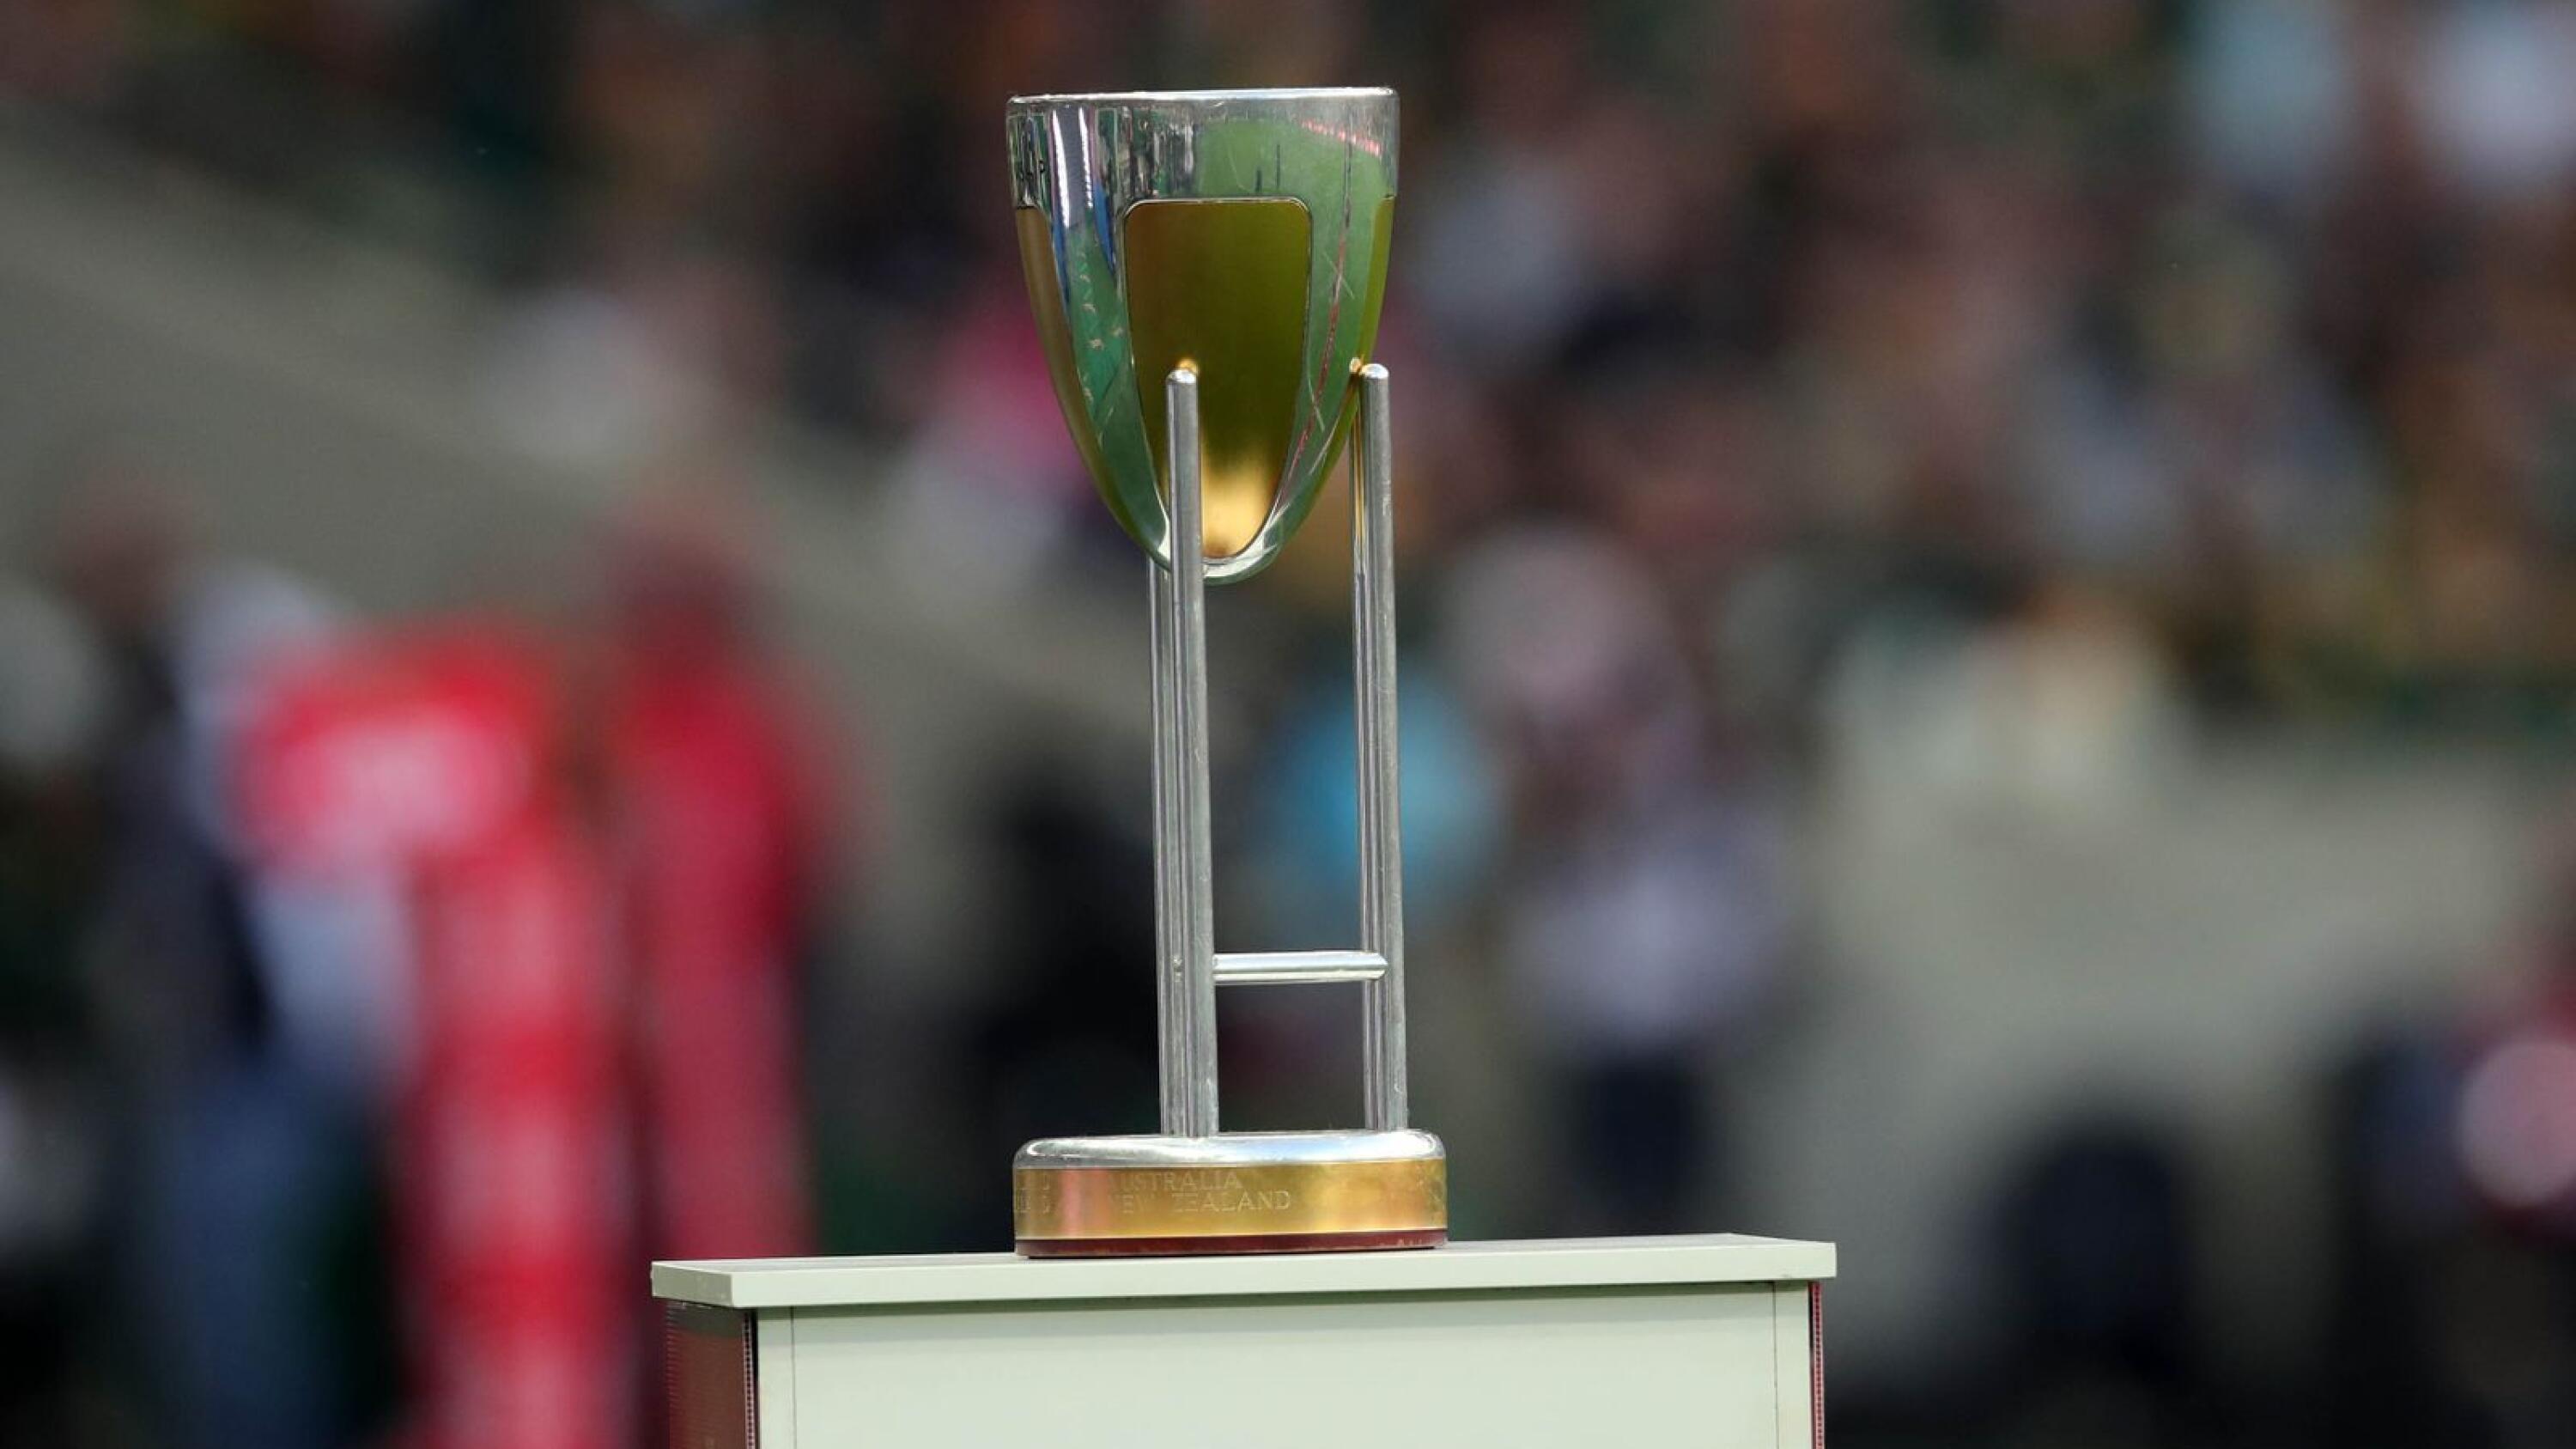 The Rugby Championship trophy on display before the Springboks’ game against the All Blacks at Mbombela Stadium in Mbombela